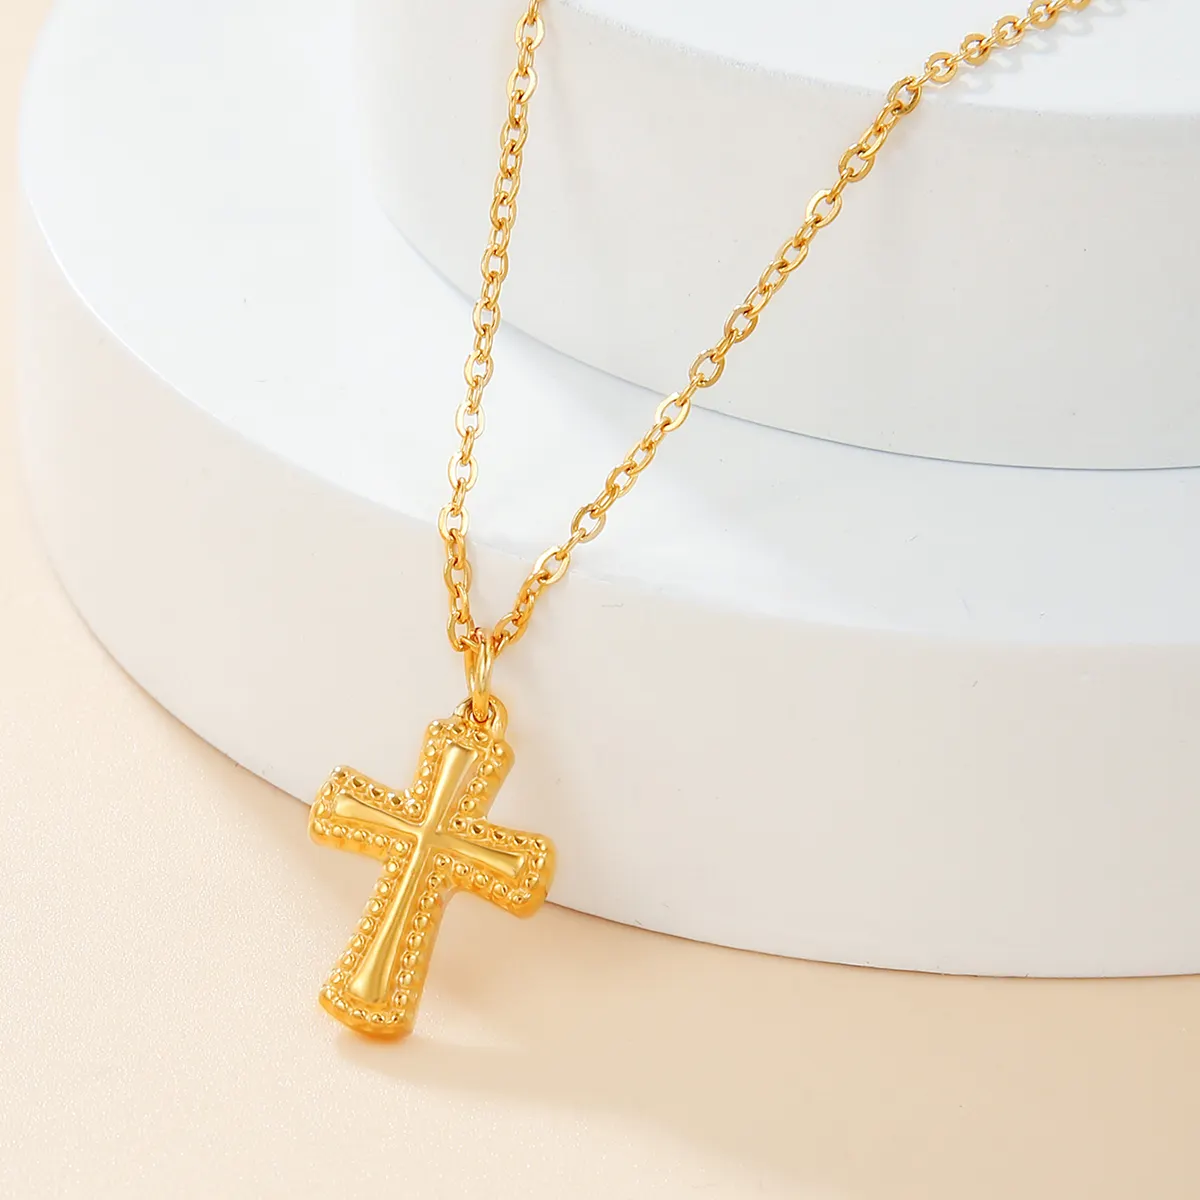 18K Gold Plated Stainless Steel Tiny Cross Pendant Necklace New Design Key Pattern Religious Gifts Engagements Jewelry Sets